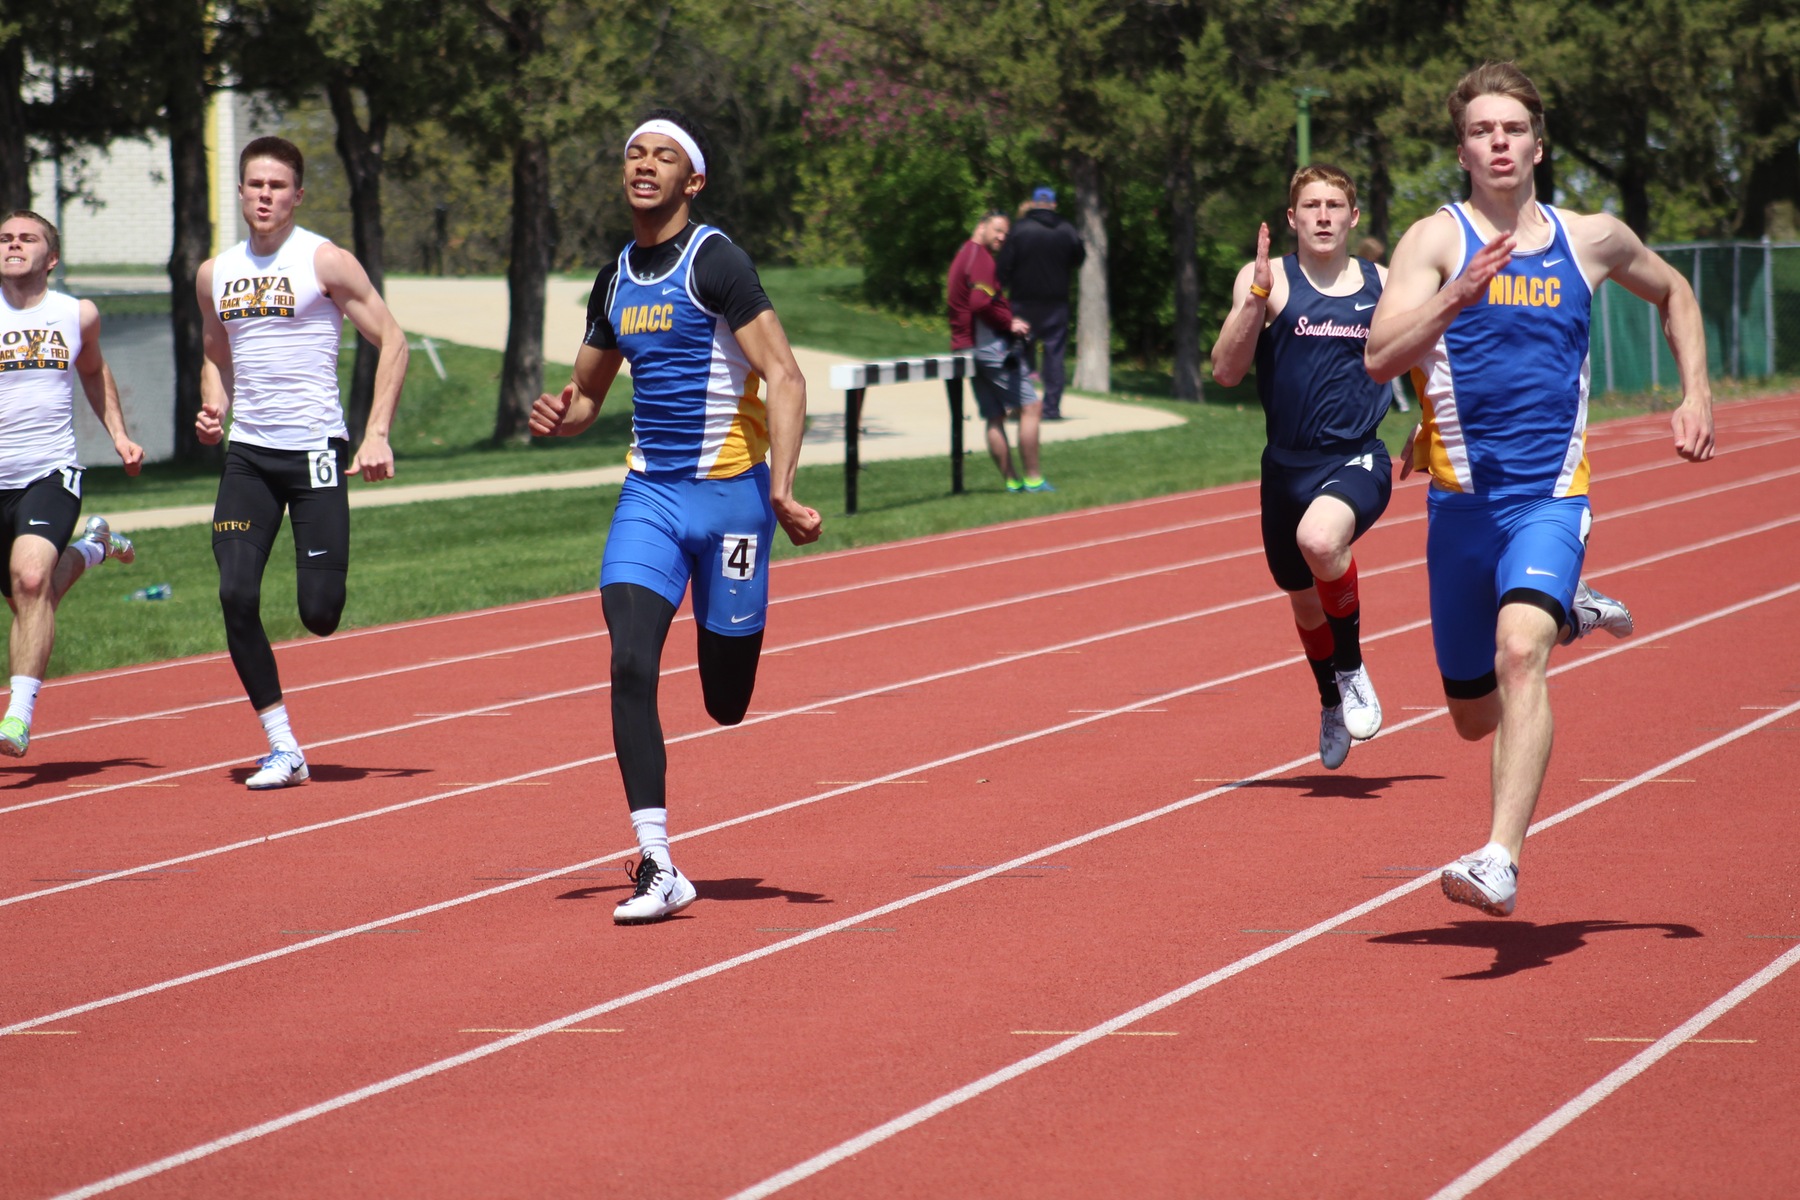 NIACC's Brody Goos (right) and Andre McKinney run the 200-meter dash at the Dick Young Invitational Saturday. Goos won in 22.75 and McKinney was third in 22.90.